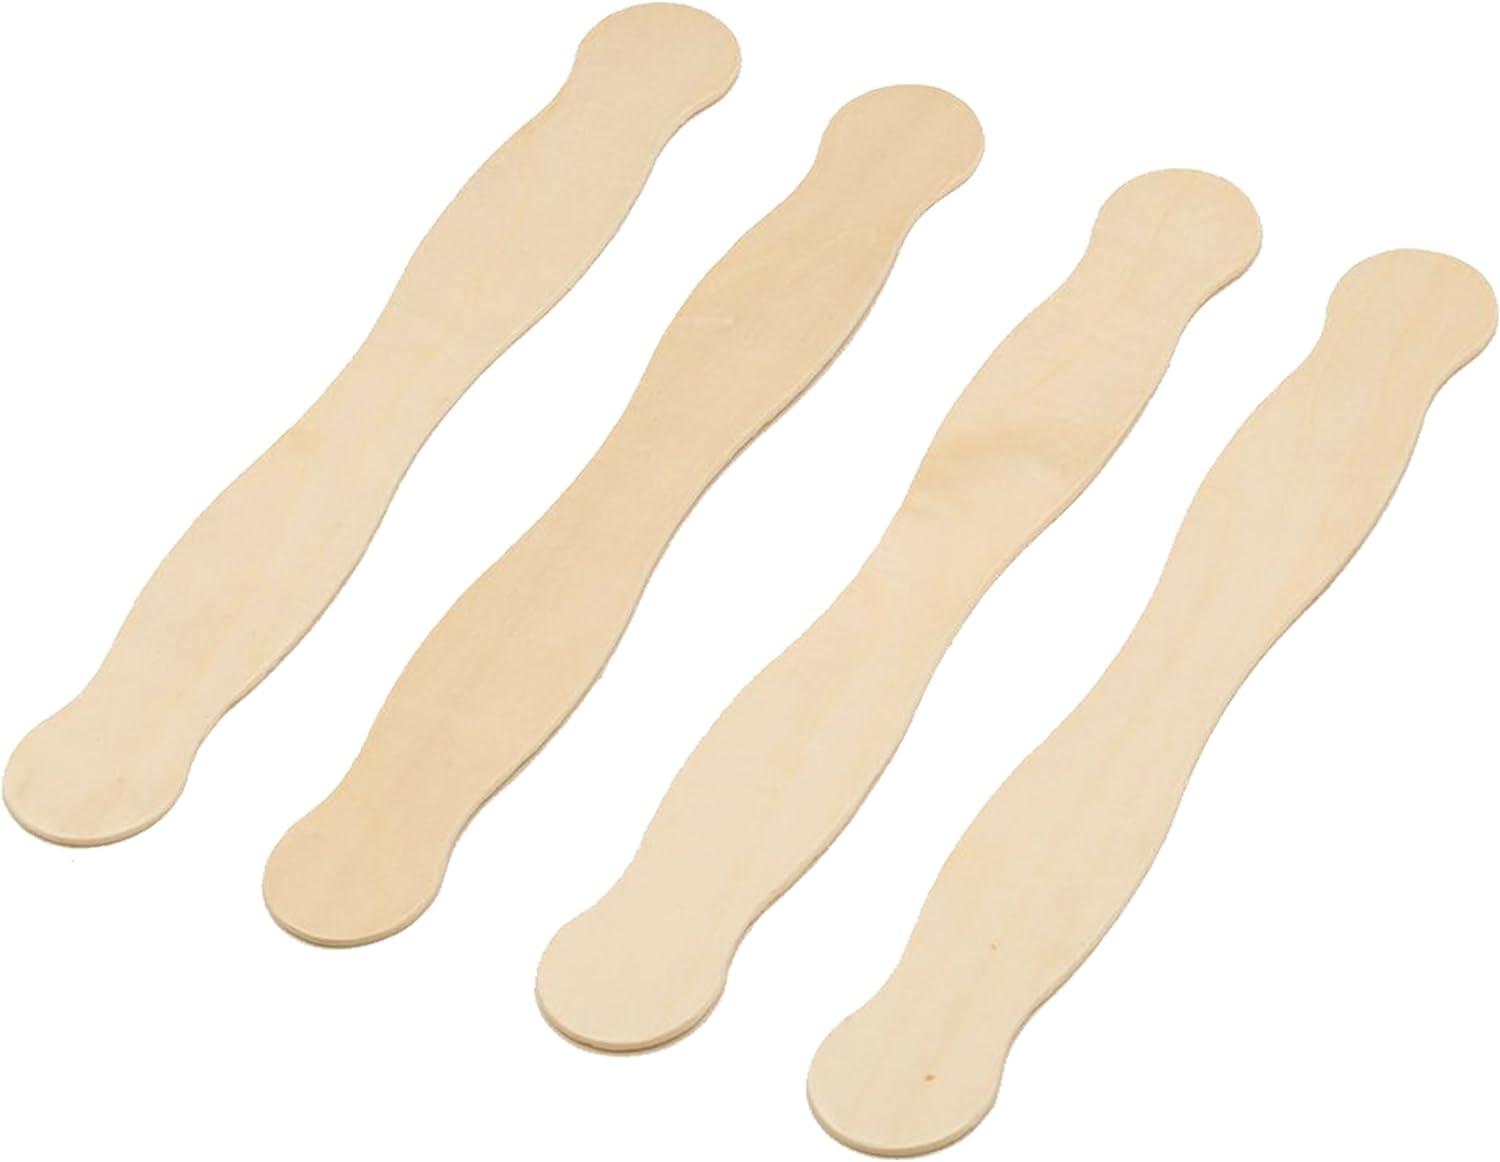 Jumbo Wooden Craft Sticks, Wavy 8 Inch Fans Sticks Large Popsicle Sticks  for Crafts, Fan Handles for DIY Crafting Wedding Programs Auction Bidding  Paddles & Paint Mixing